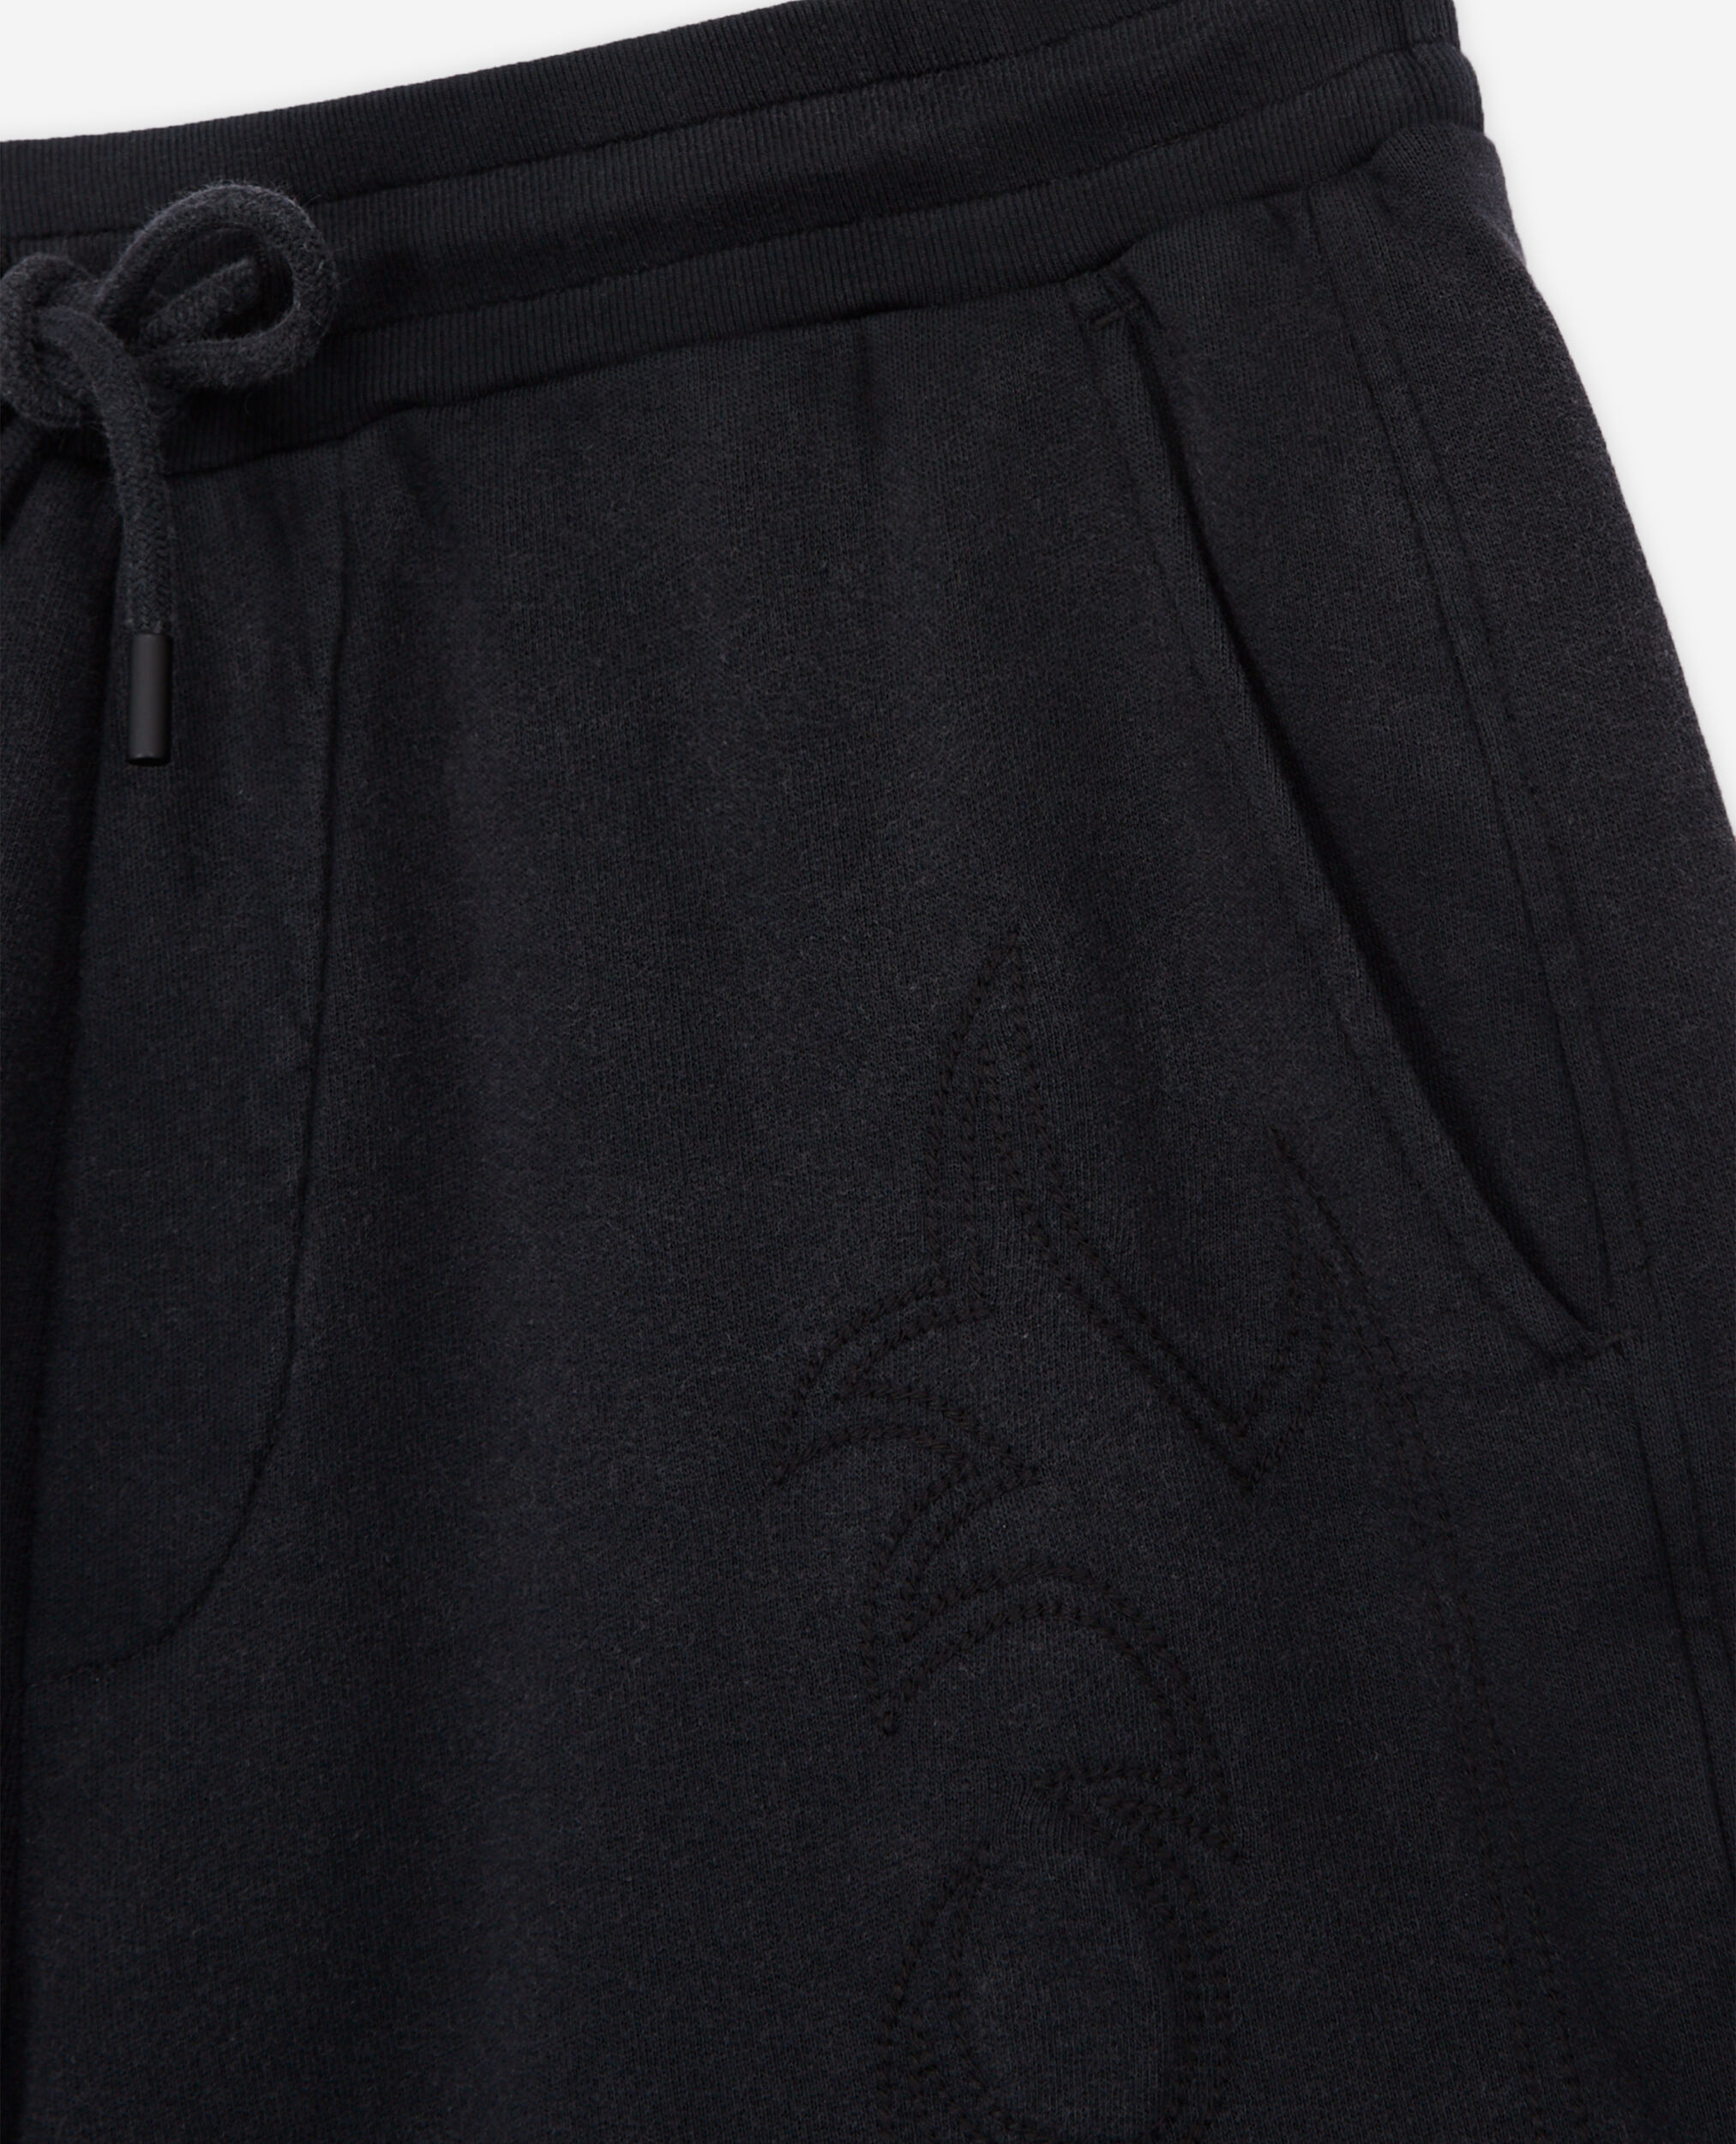 Black fleece shorts with Western-style embroidery, BLACK WASHED, hi-res image number null